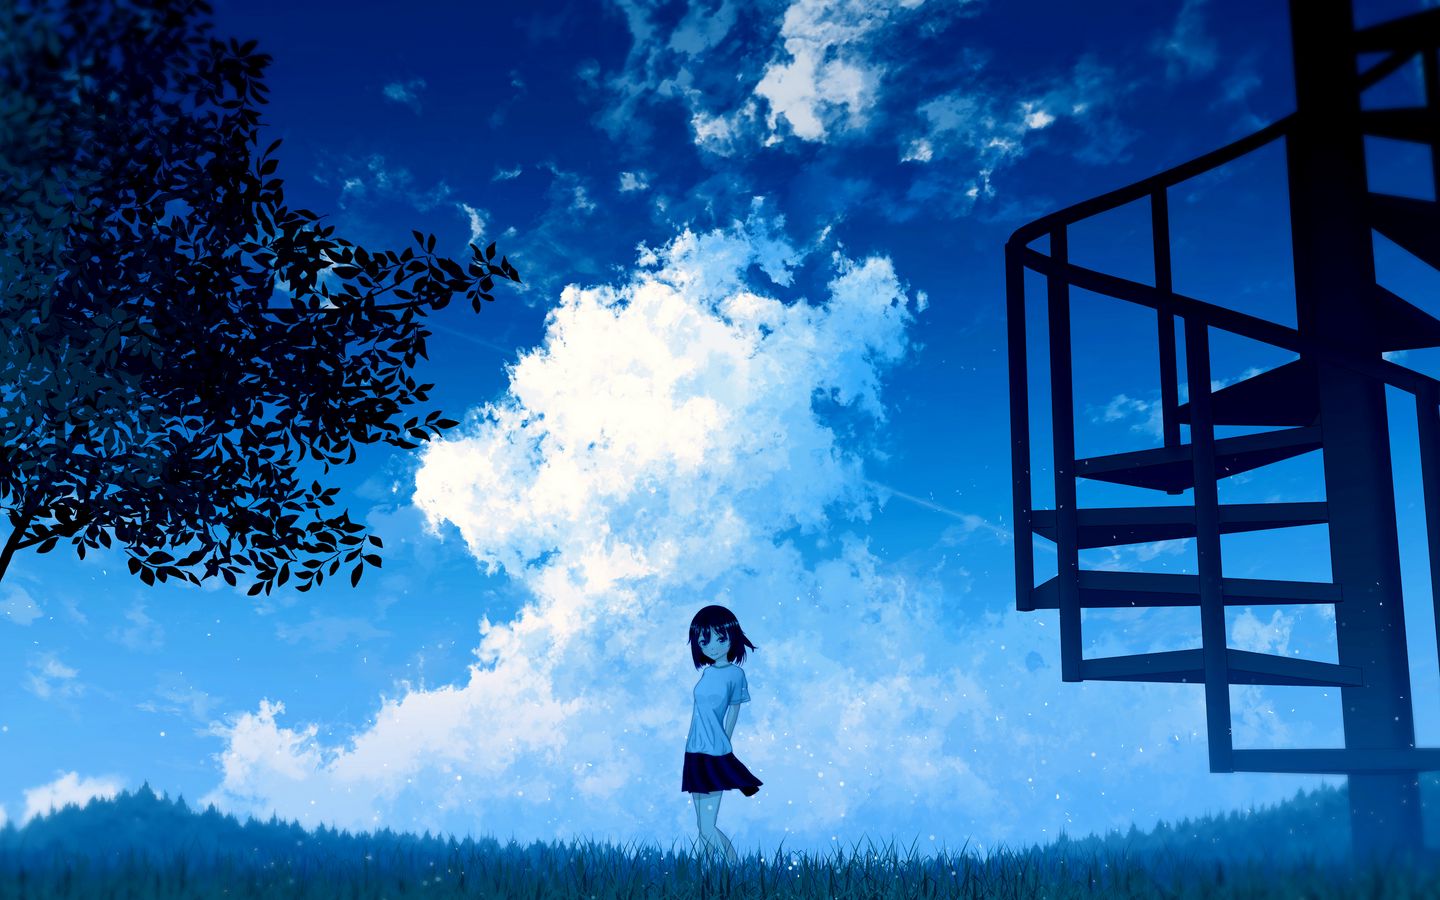 Download wallpaper 1440x900 anime, girl, sky, clouds widescreen 16:10 hd  background